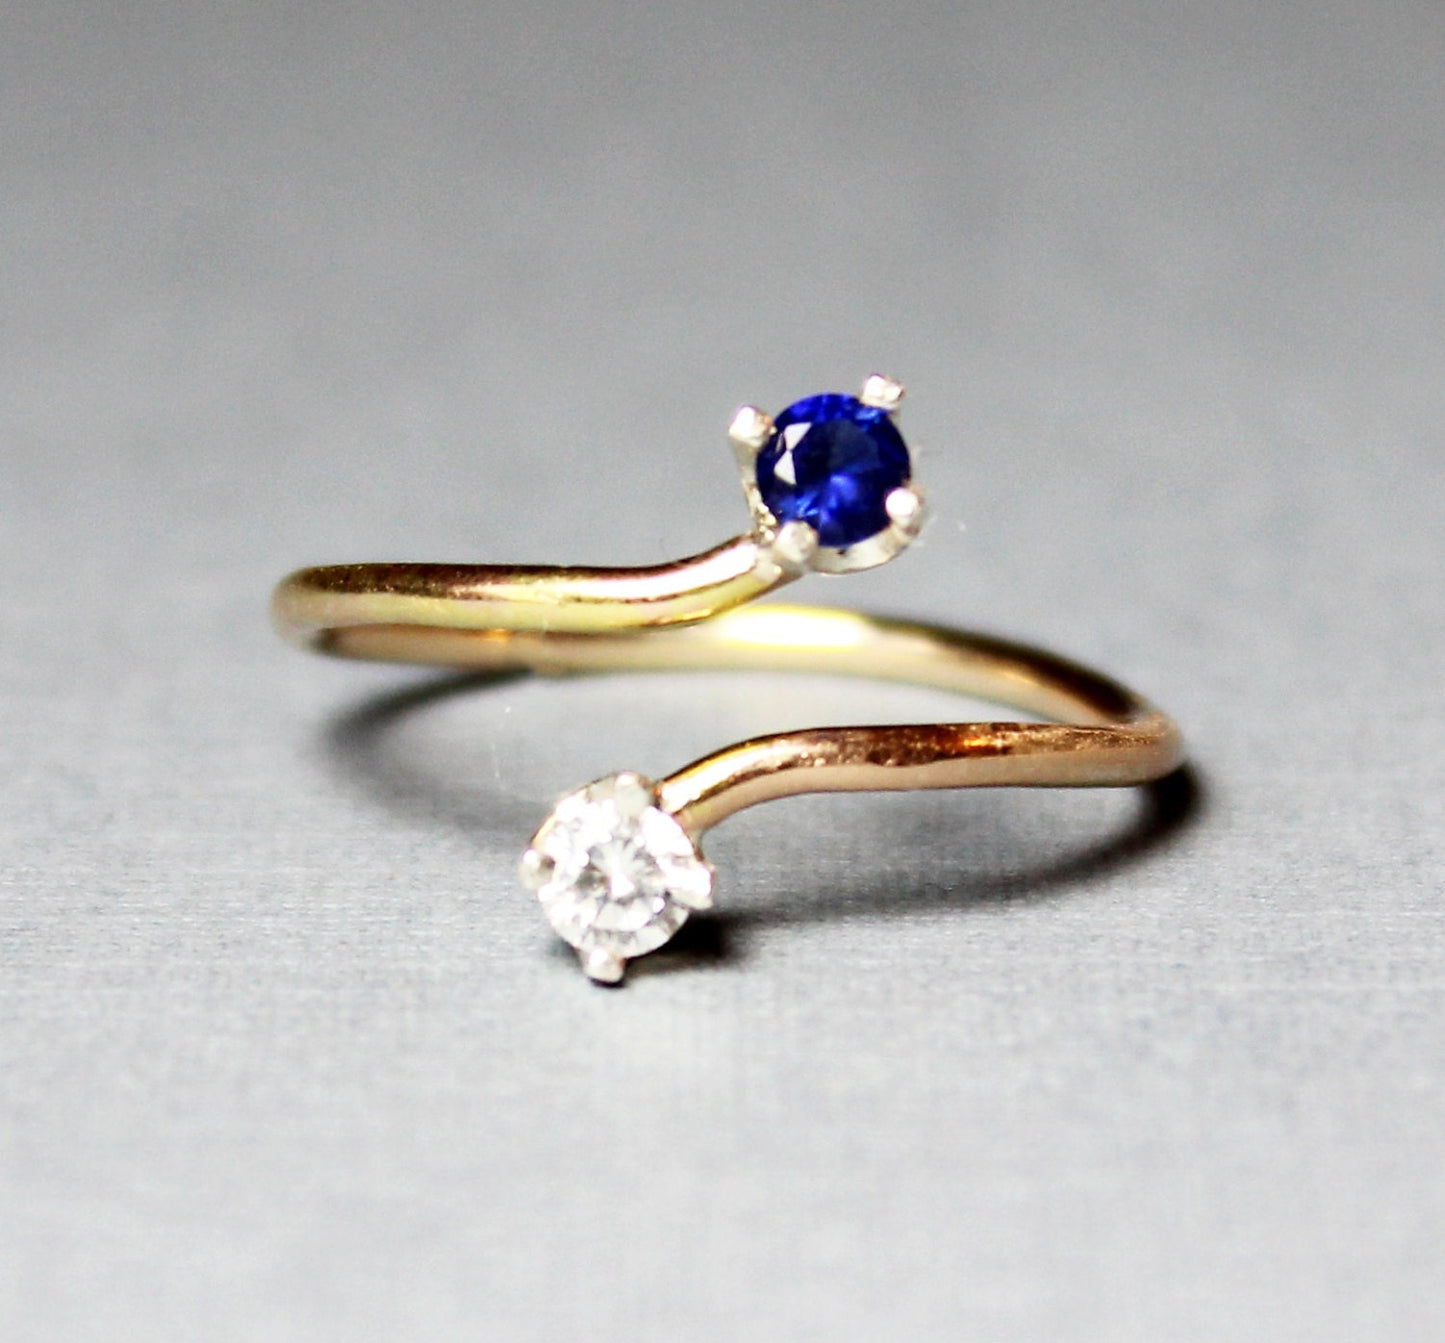 Dual Birthstone Ring - Saphhire and Diamond Cubic Zirconia Ring - 14K Gold Filled Ring -Double Birthstone Ring